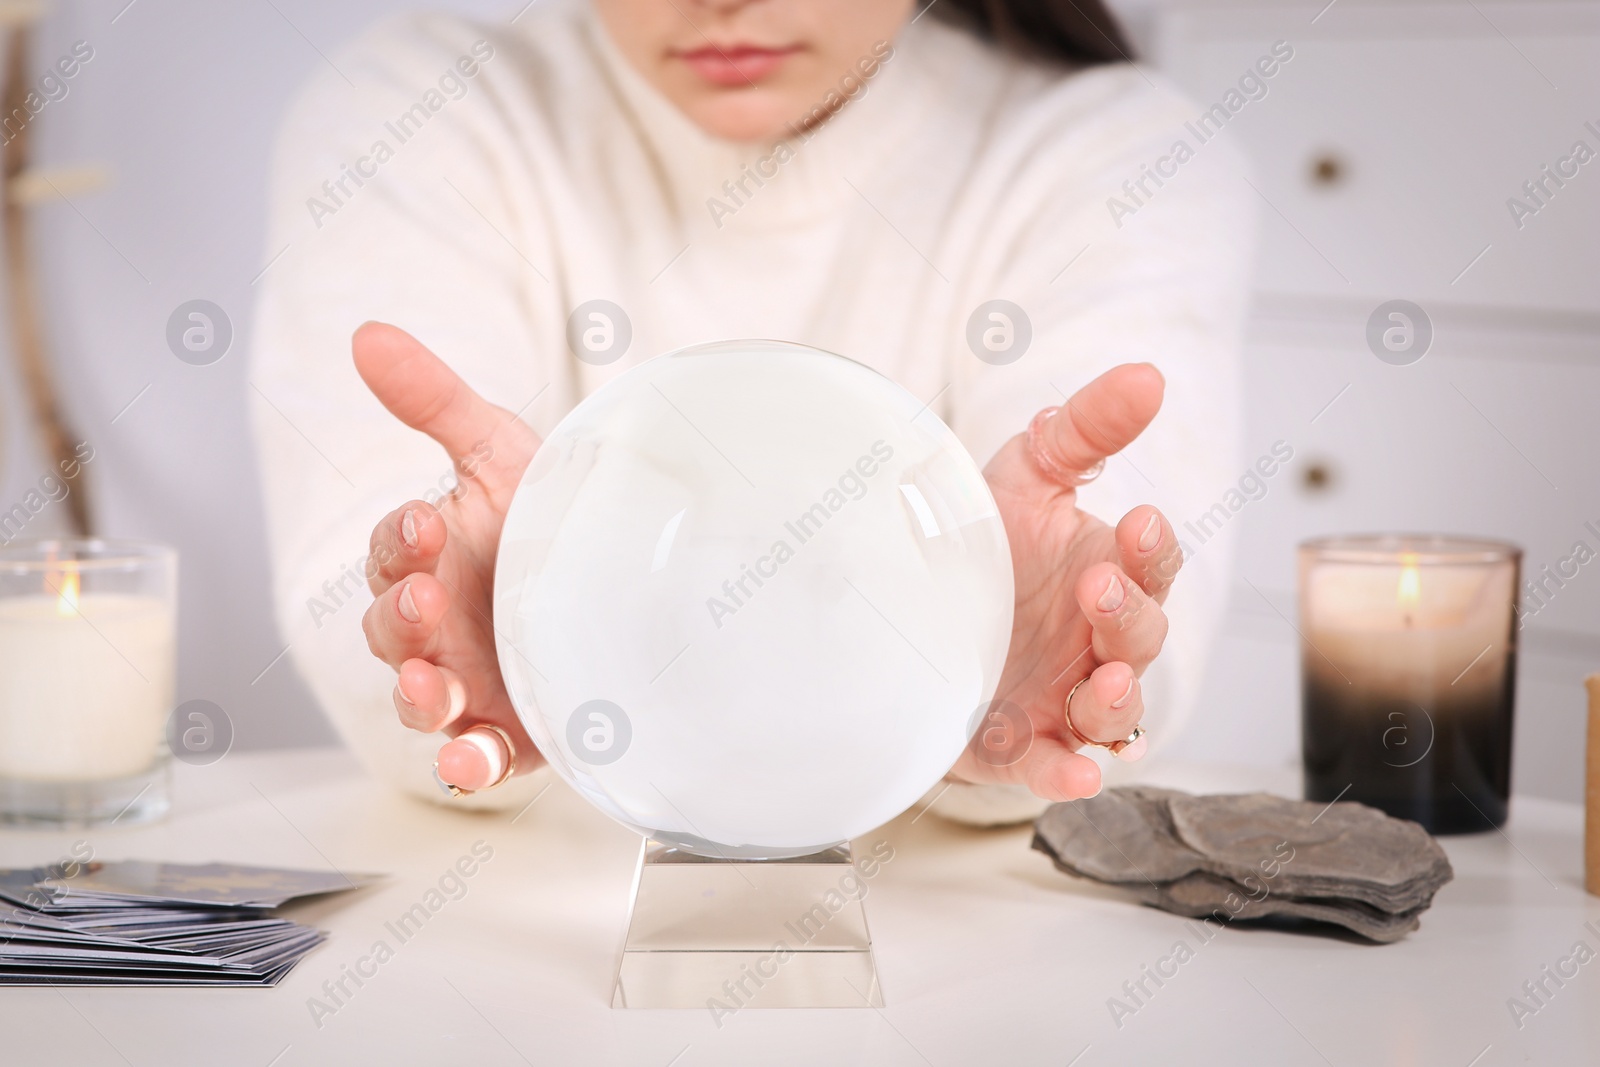 Photo of Soothsayer using crystal ball to predict future at table indoors, closeup